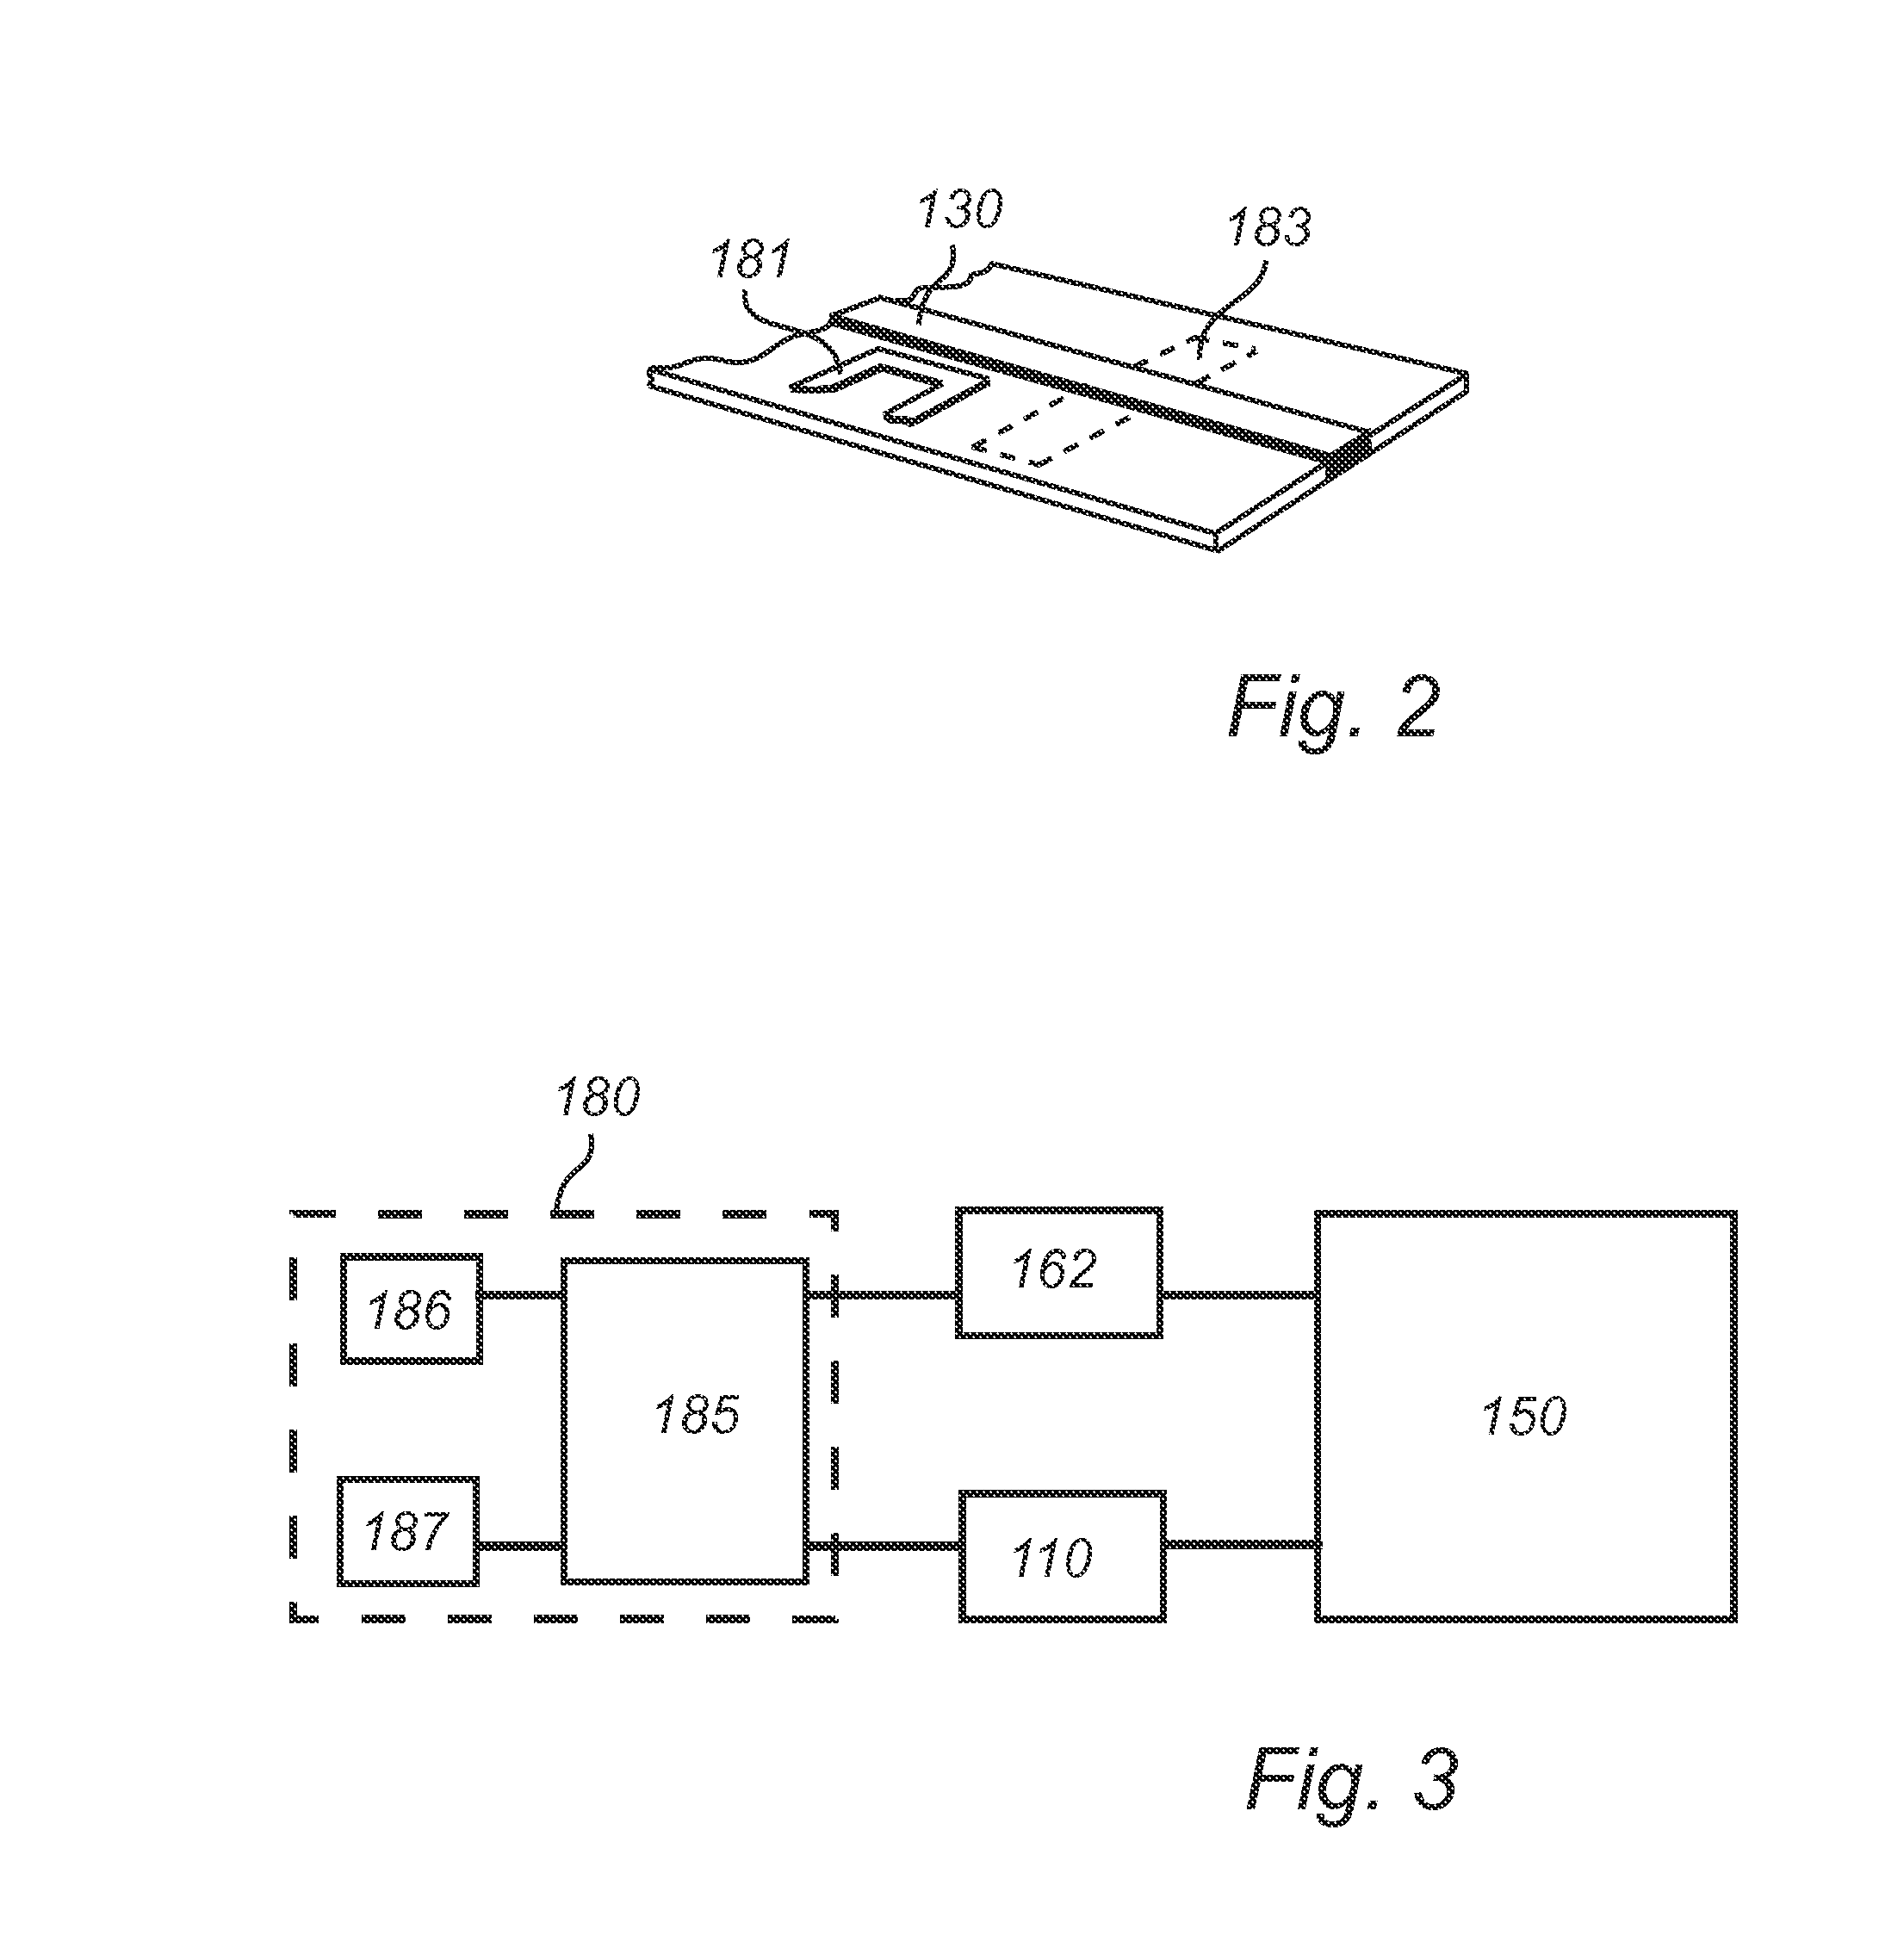 Microwave oven switching between predefined modes